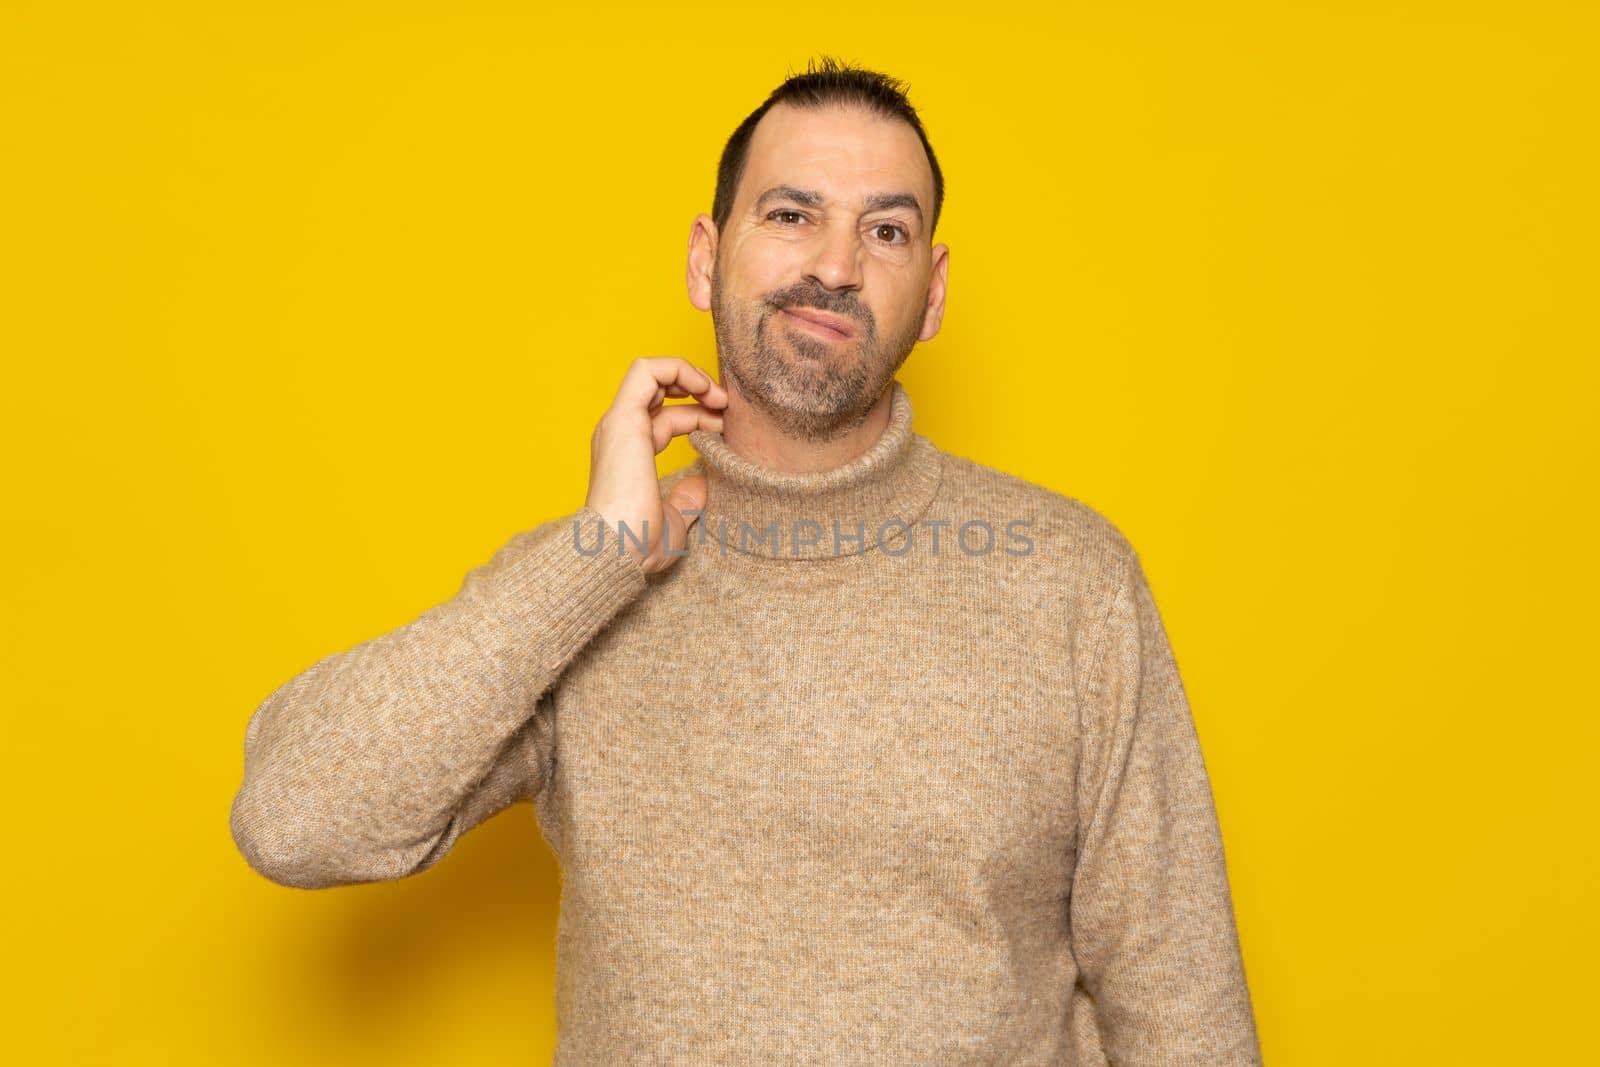 Bearded hispanic man wearing beige turtleneck scratching his neck and grimacing isolated over yellow background. Concept of doubt and indecision